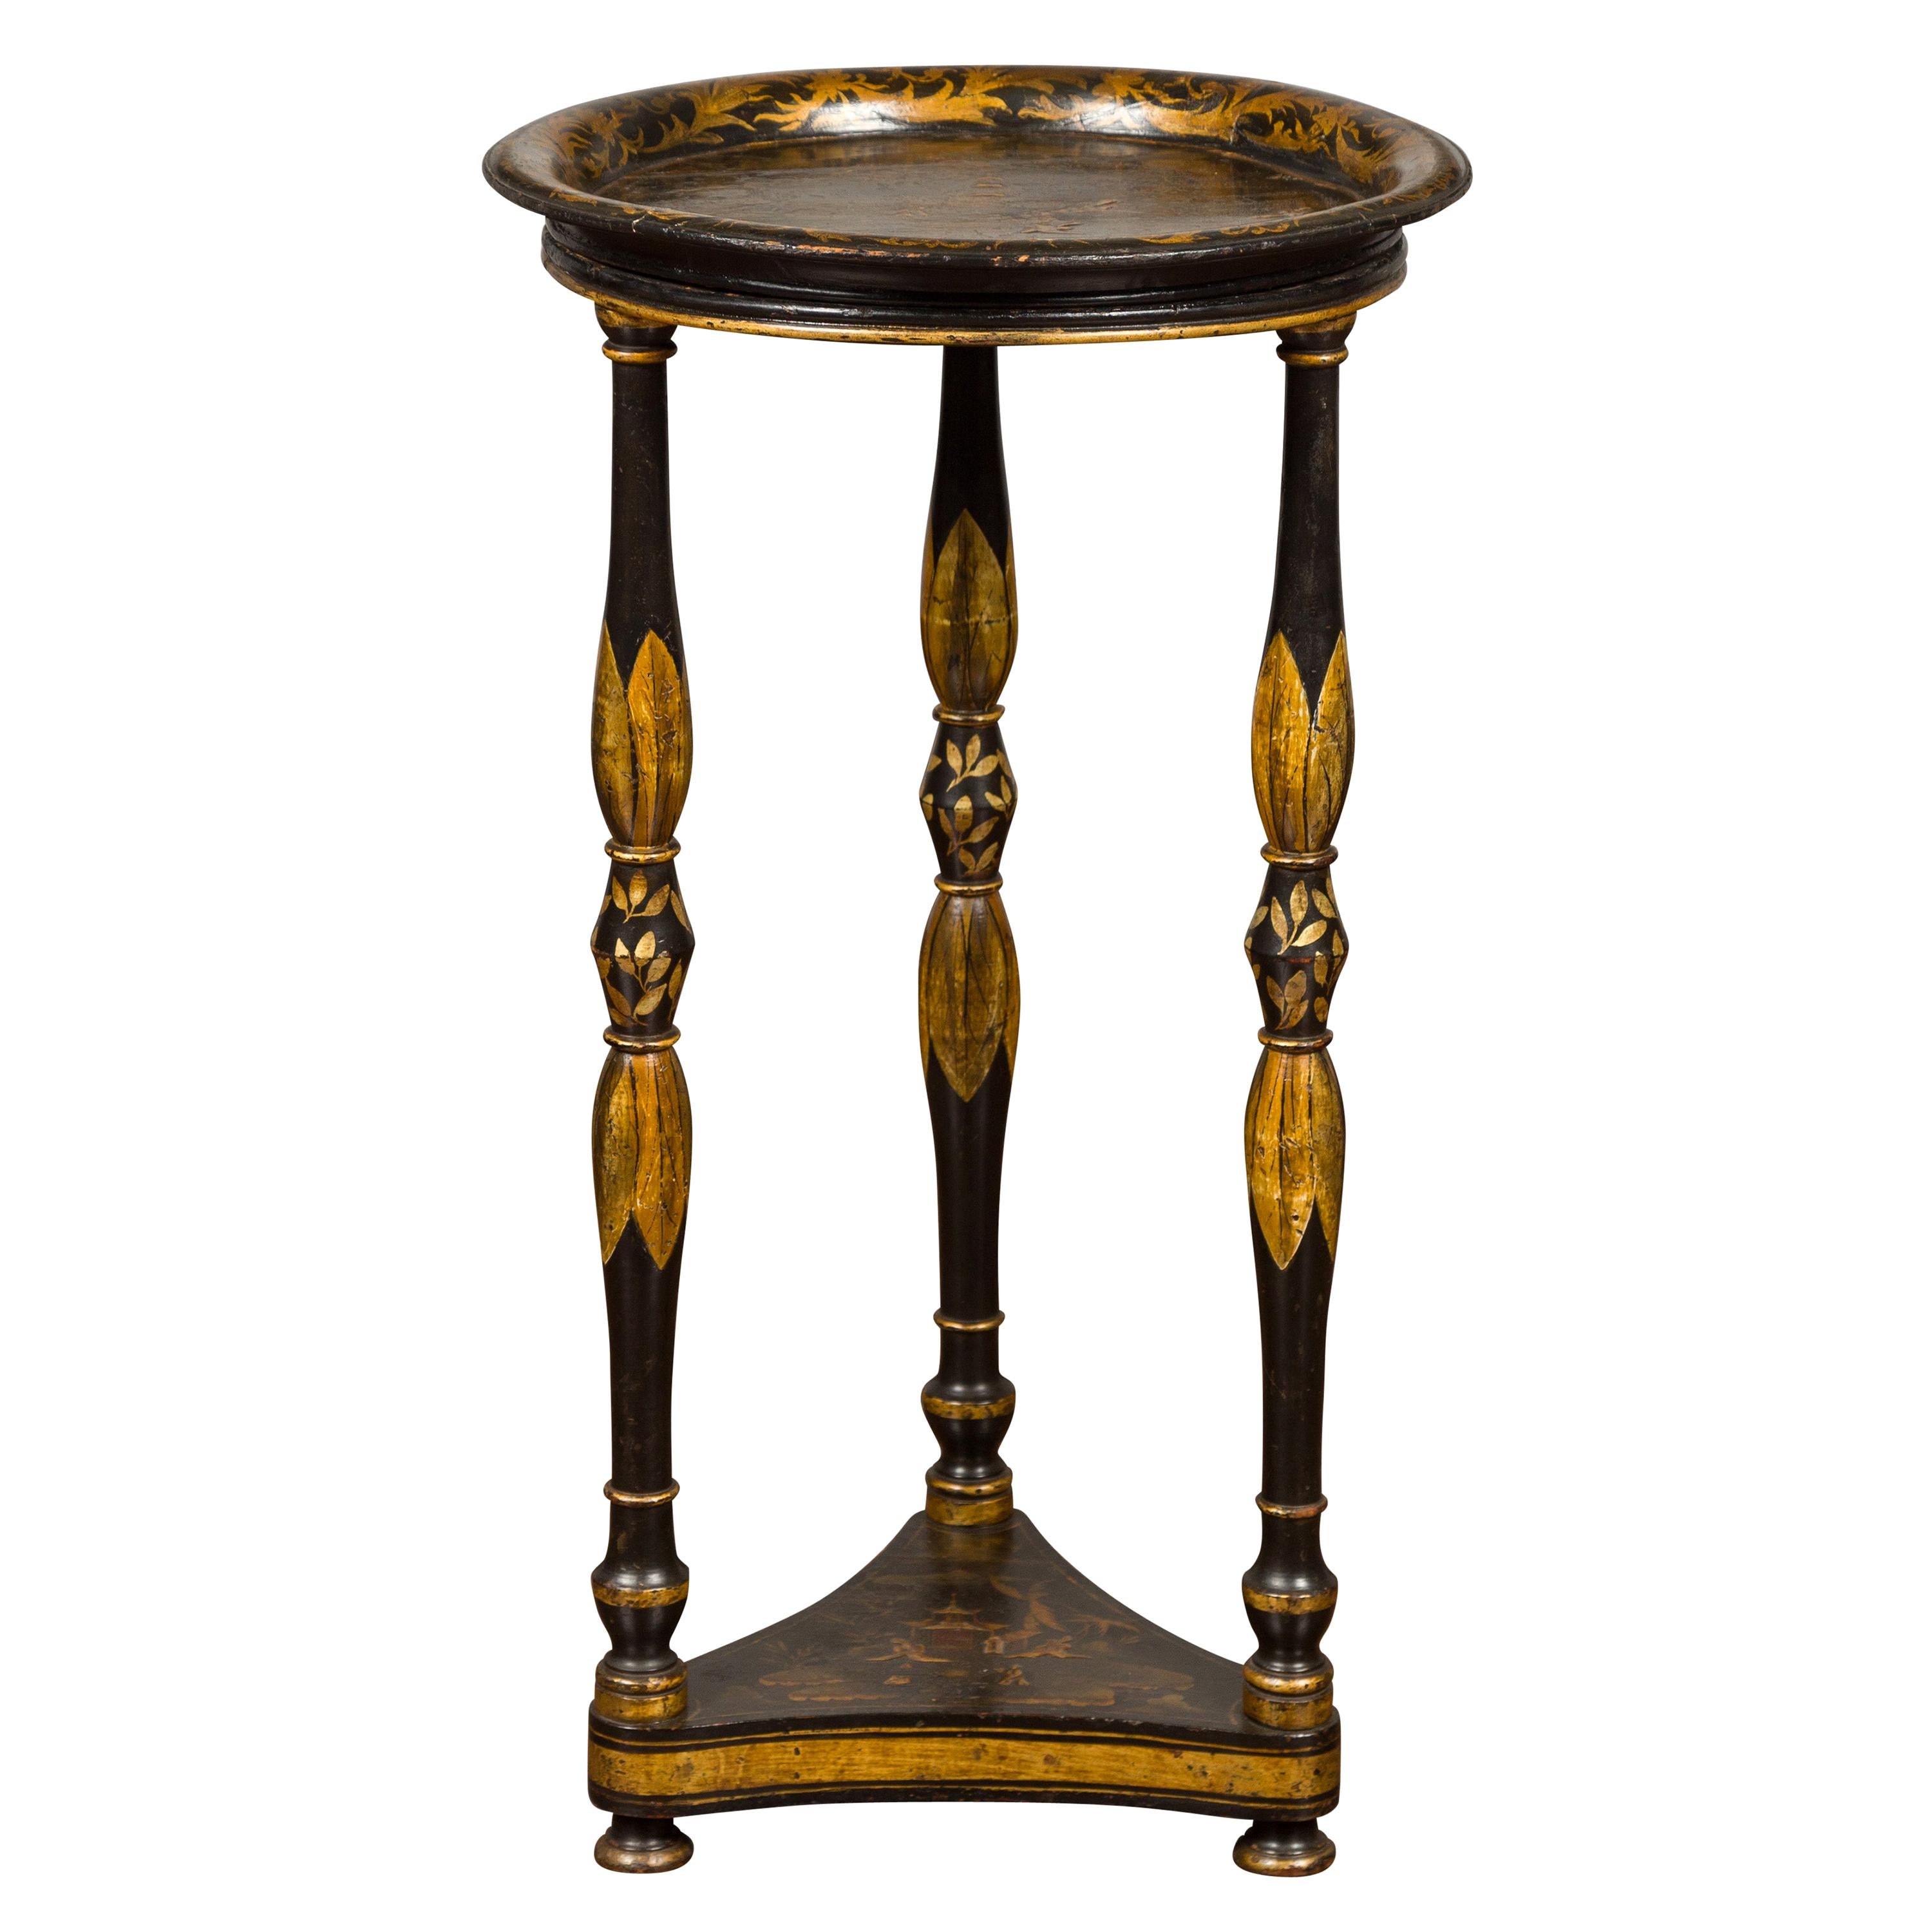 English 1850s Black Chinoiserie Guéridon Table with Gilt Motifs and Turned Legs